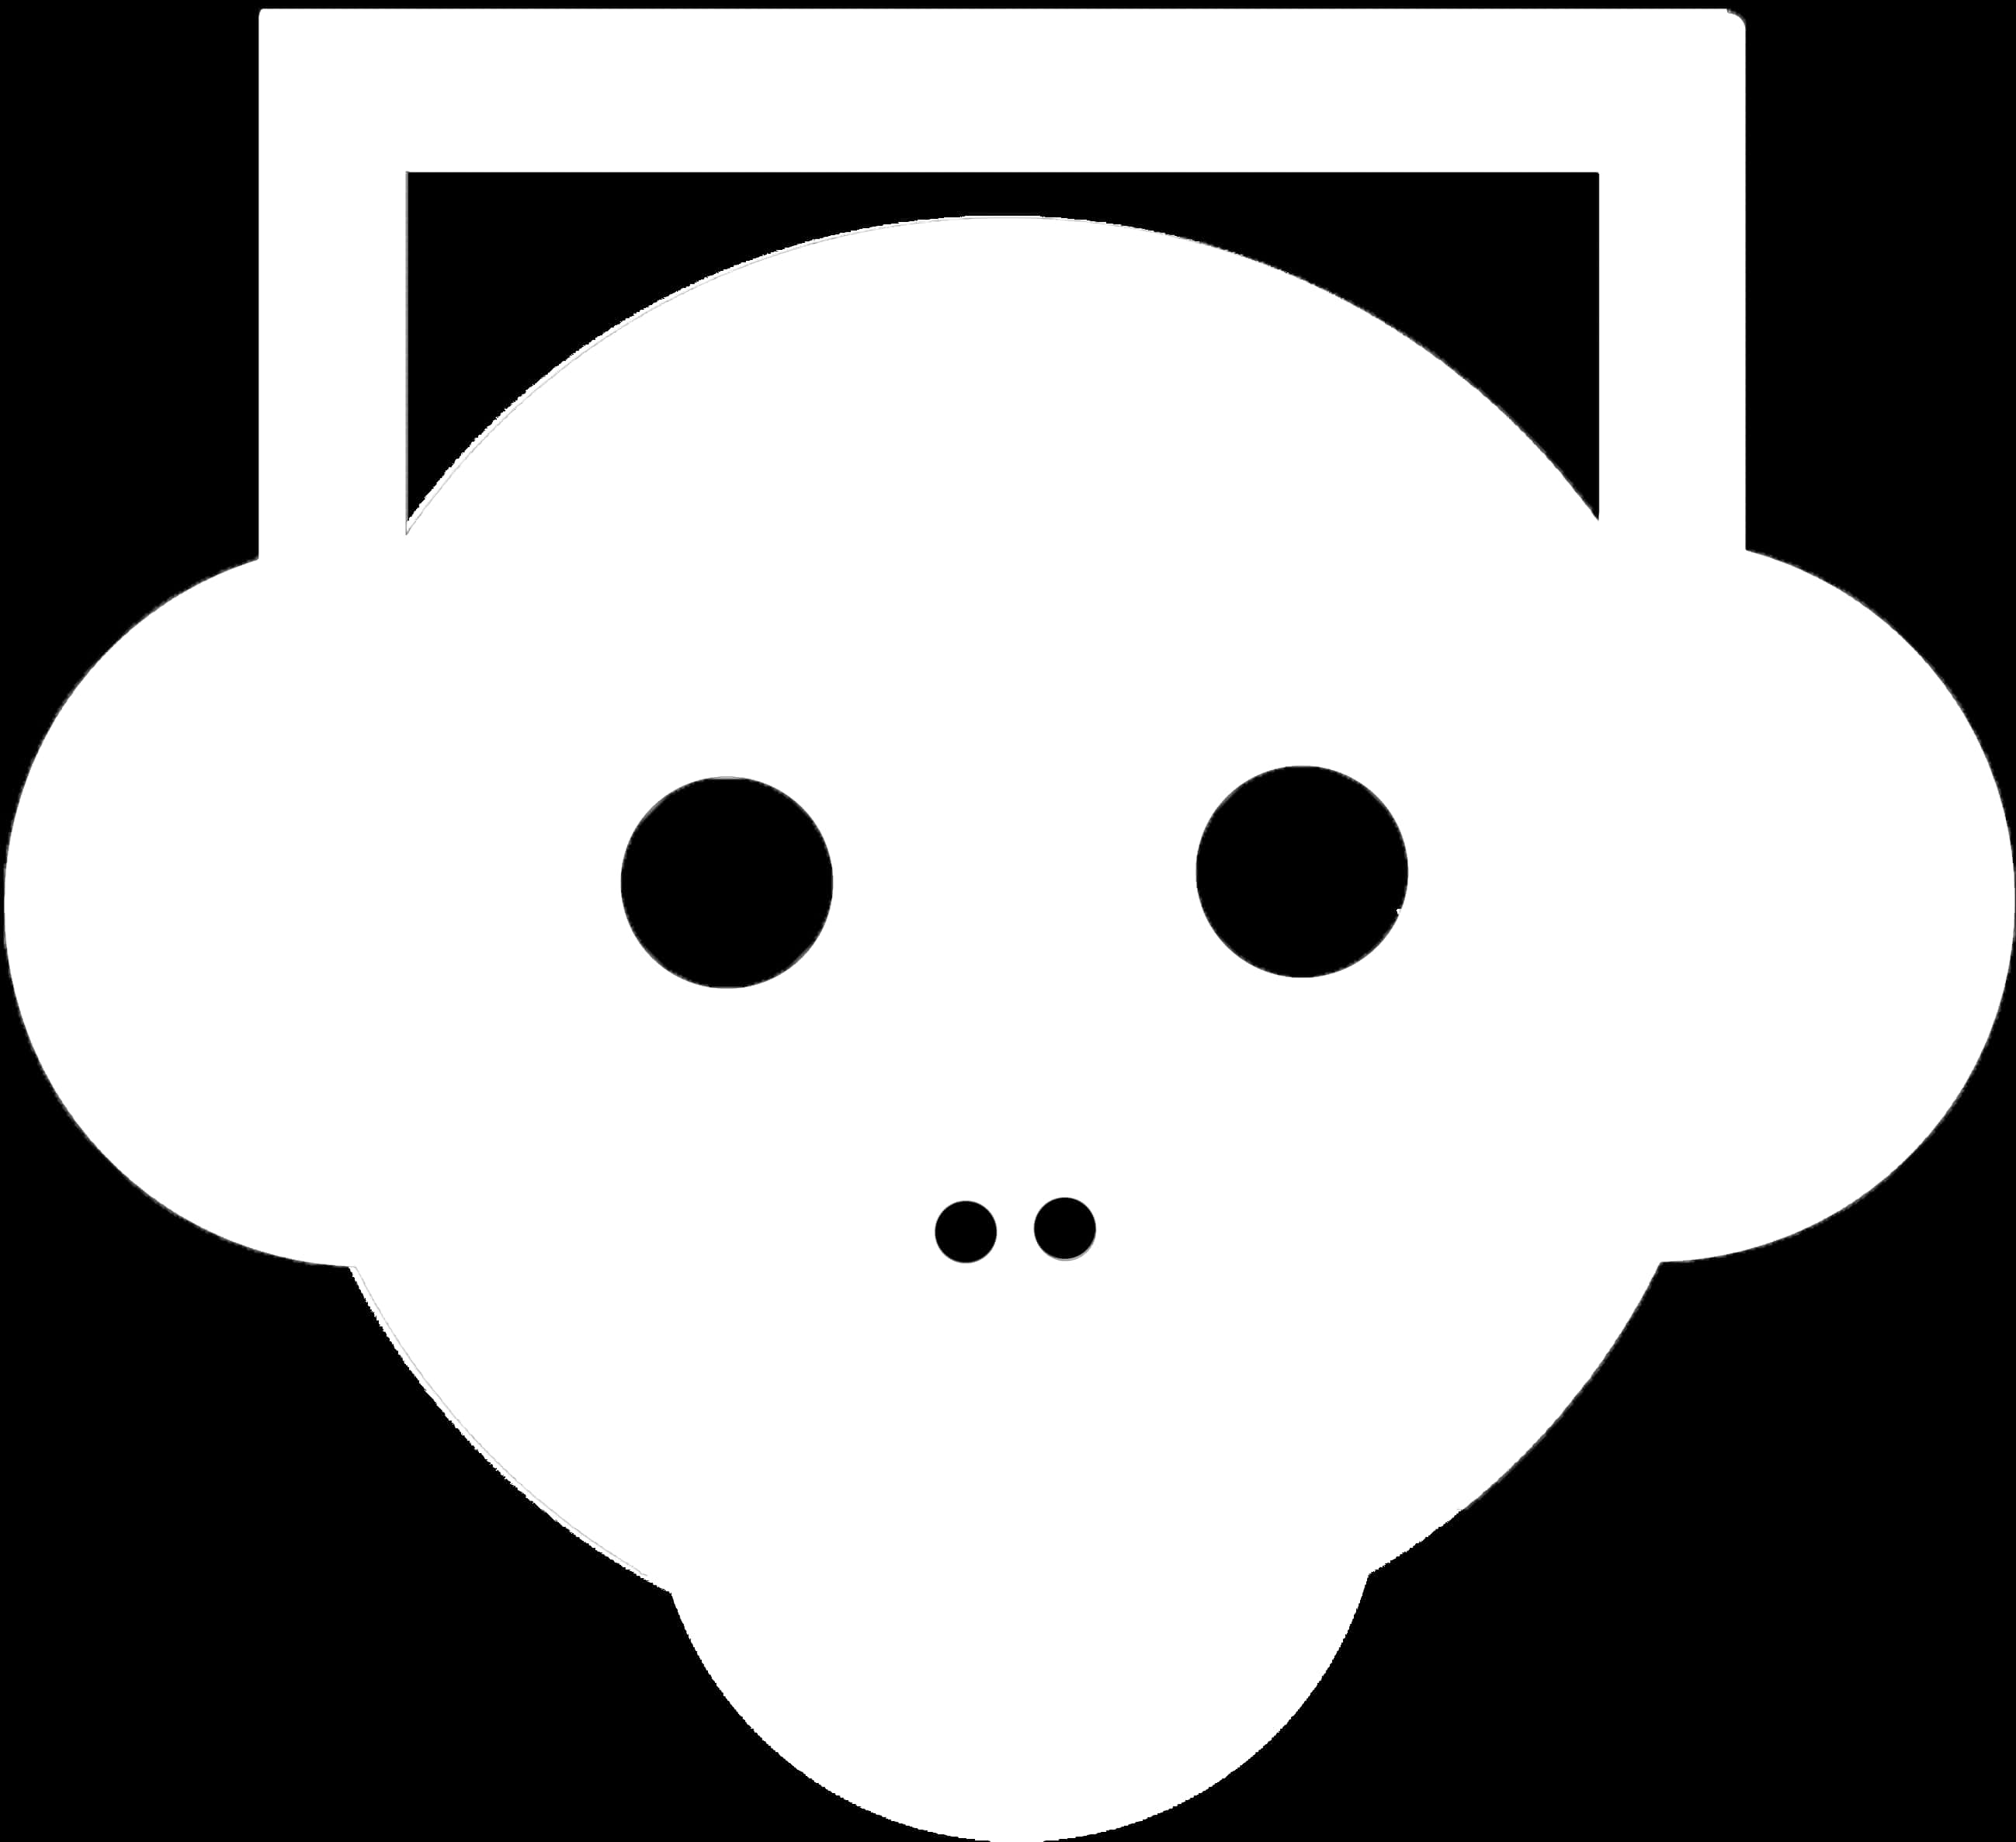 Monochrome Abstract Face Graphic PNG